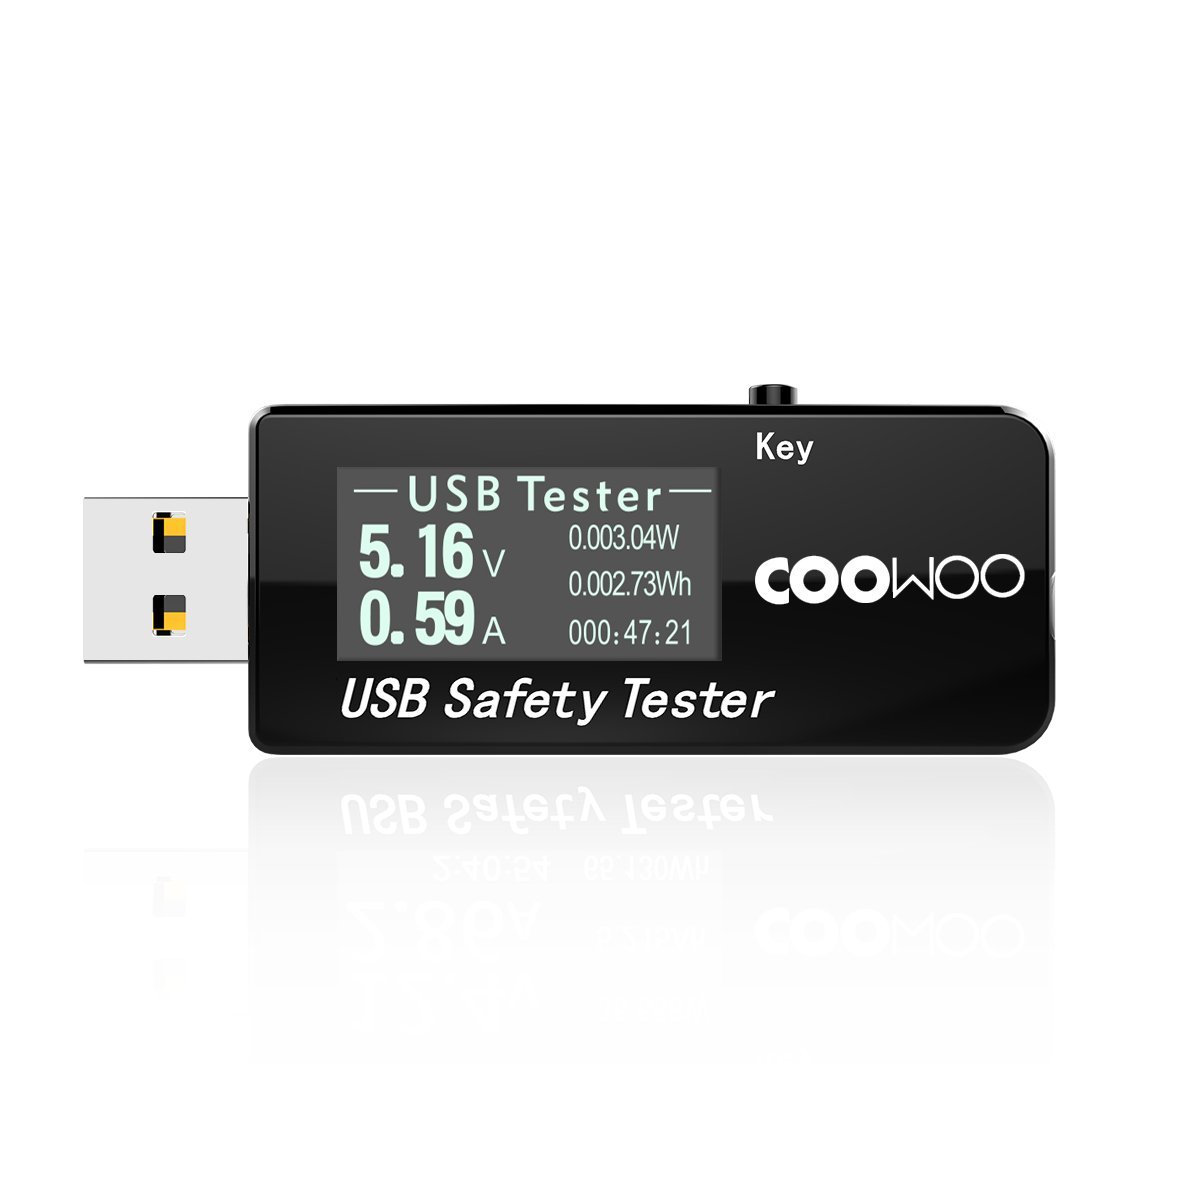 COOWOO USB Digital Power Meter Tester Multimeter Current and Voltage Monitor, DC 5.1A 30V Amp Voltage Power Meter, Test Speed of Chargers, Cables, Capacity of Power Banks-Black